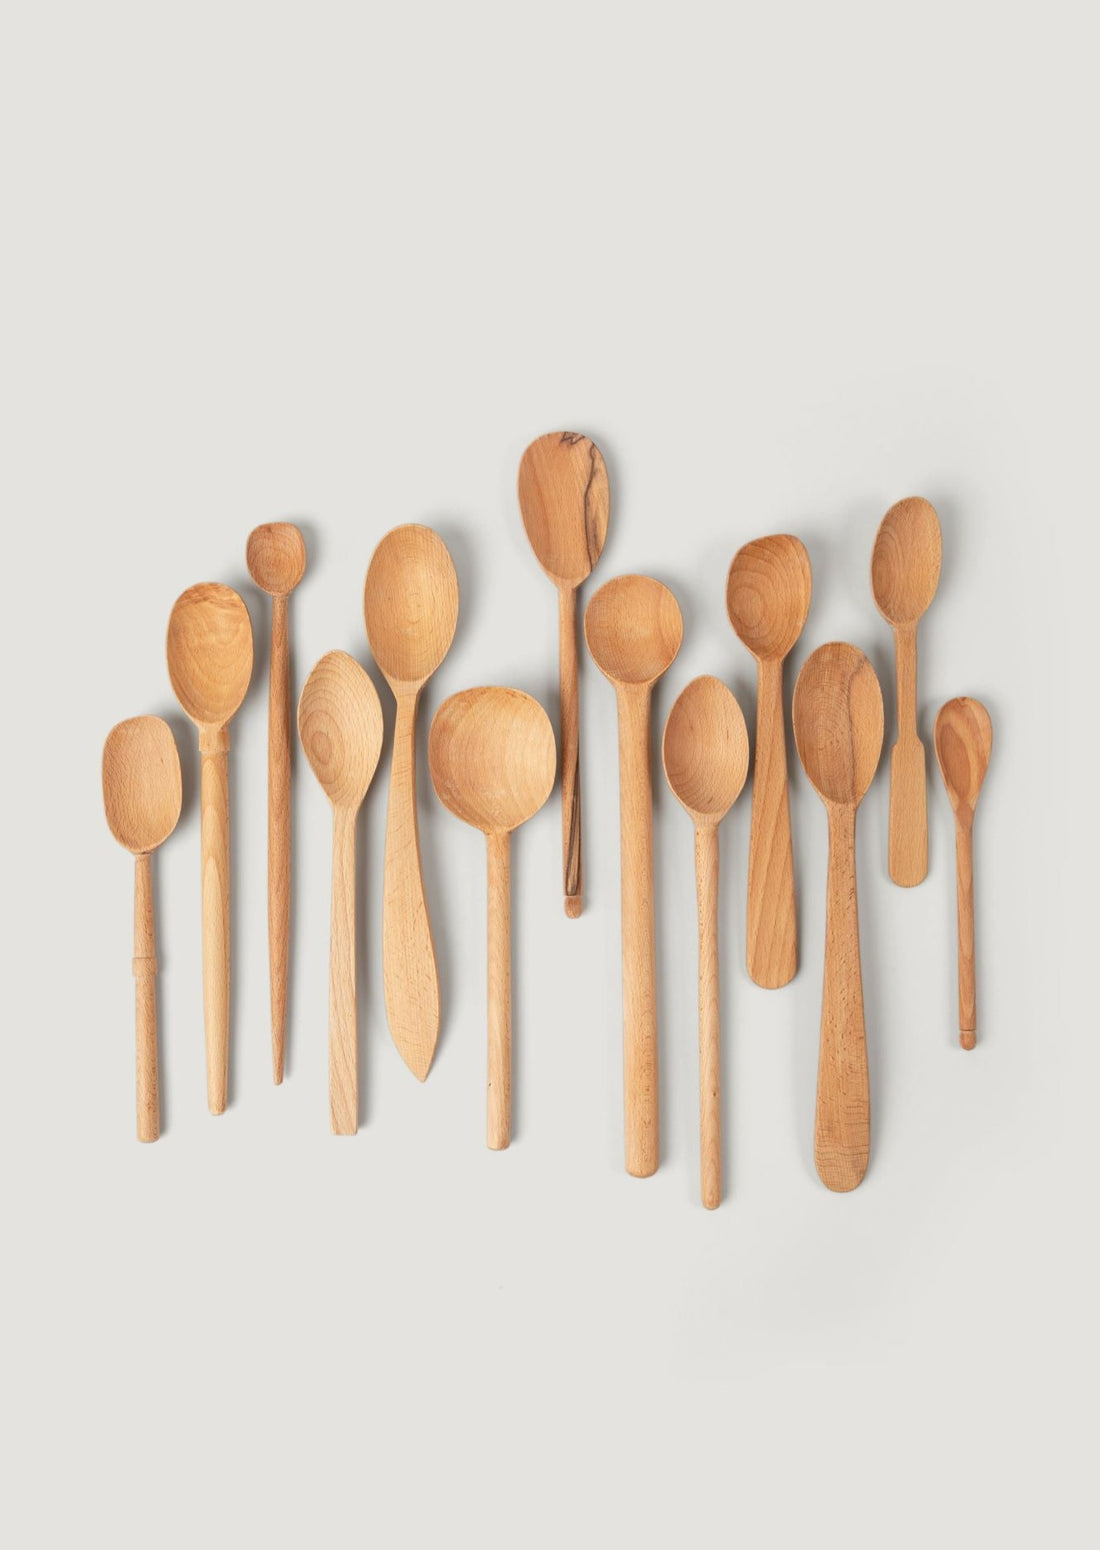 Kitchen Utensil Set of 13 Assorted Hand-Carved Wood Spoons at Afloral